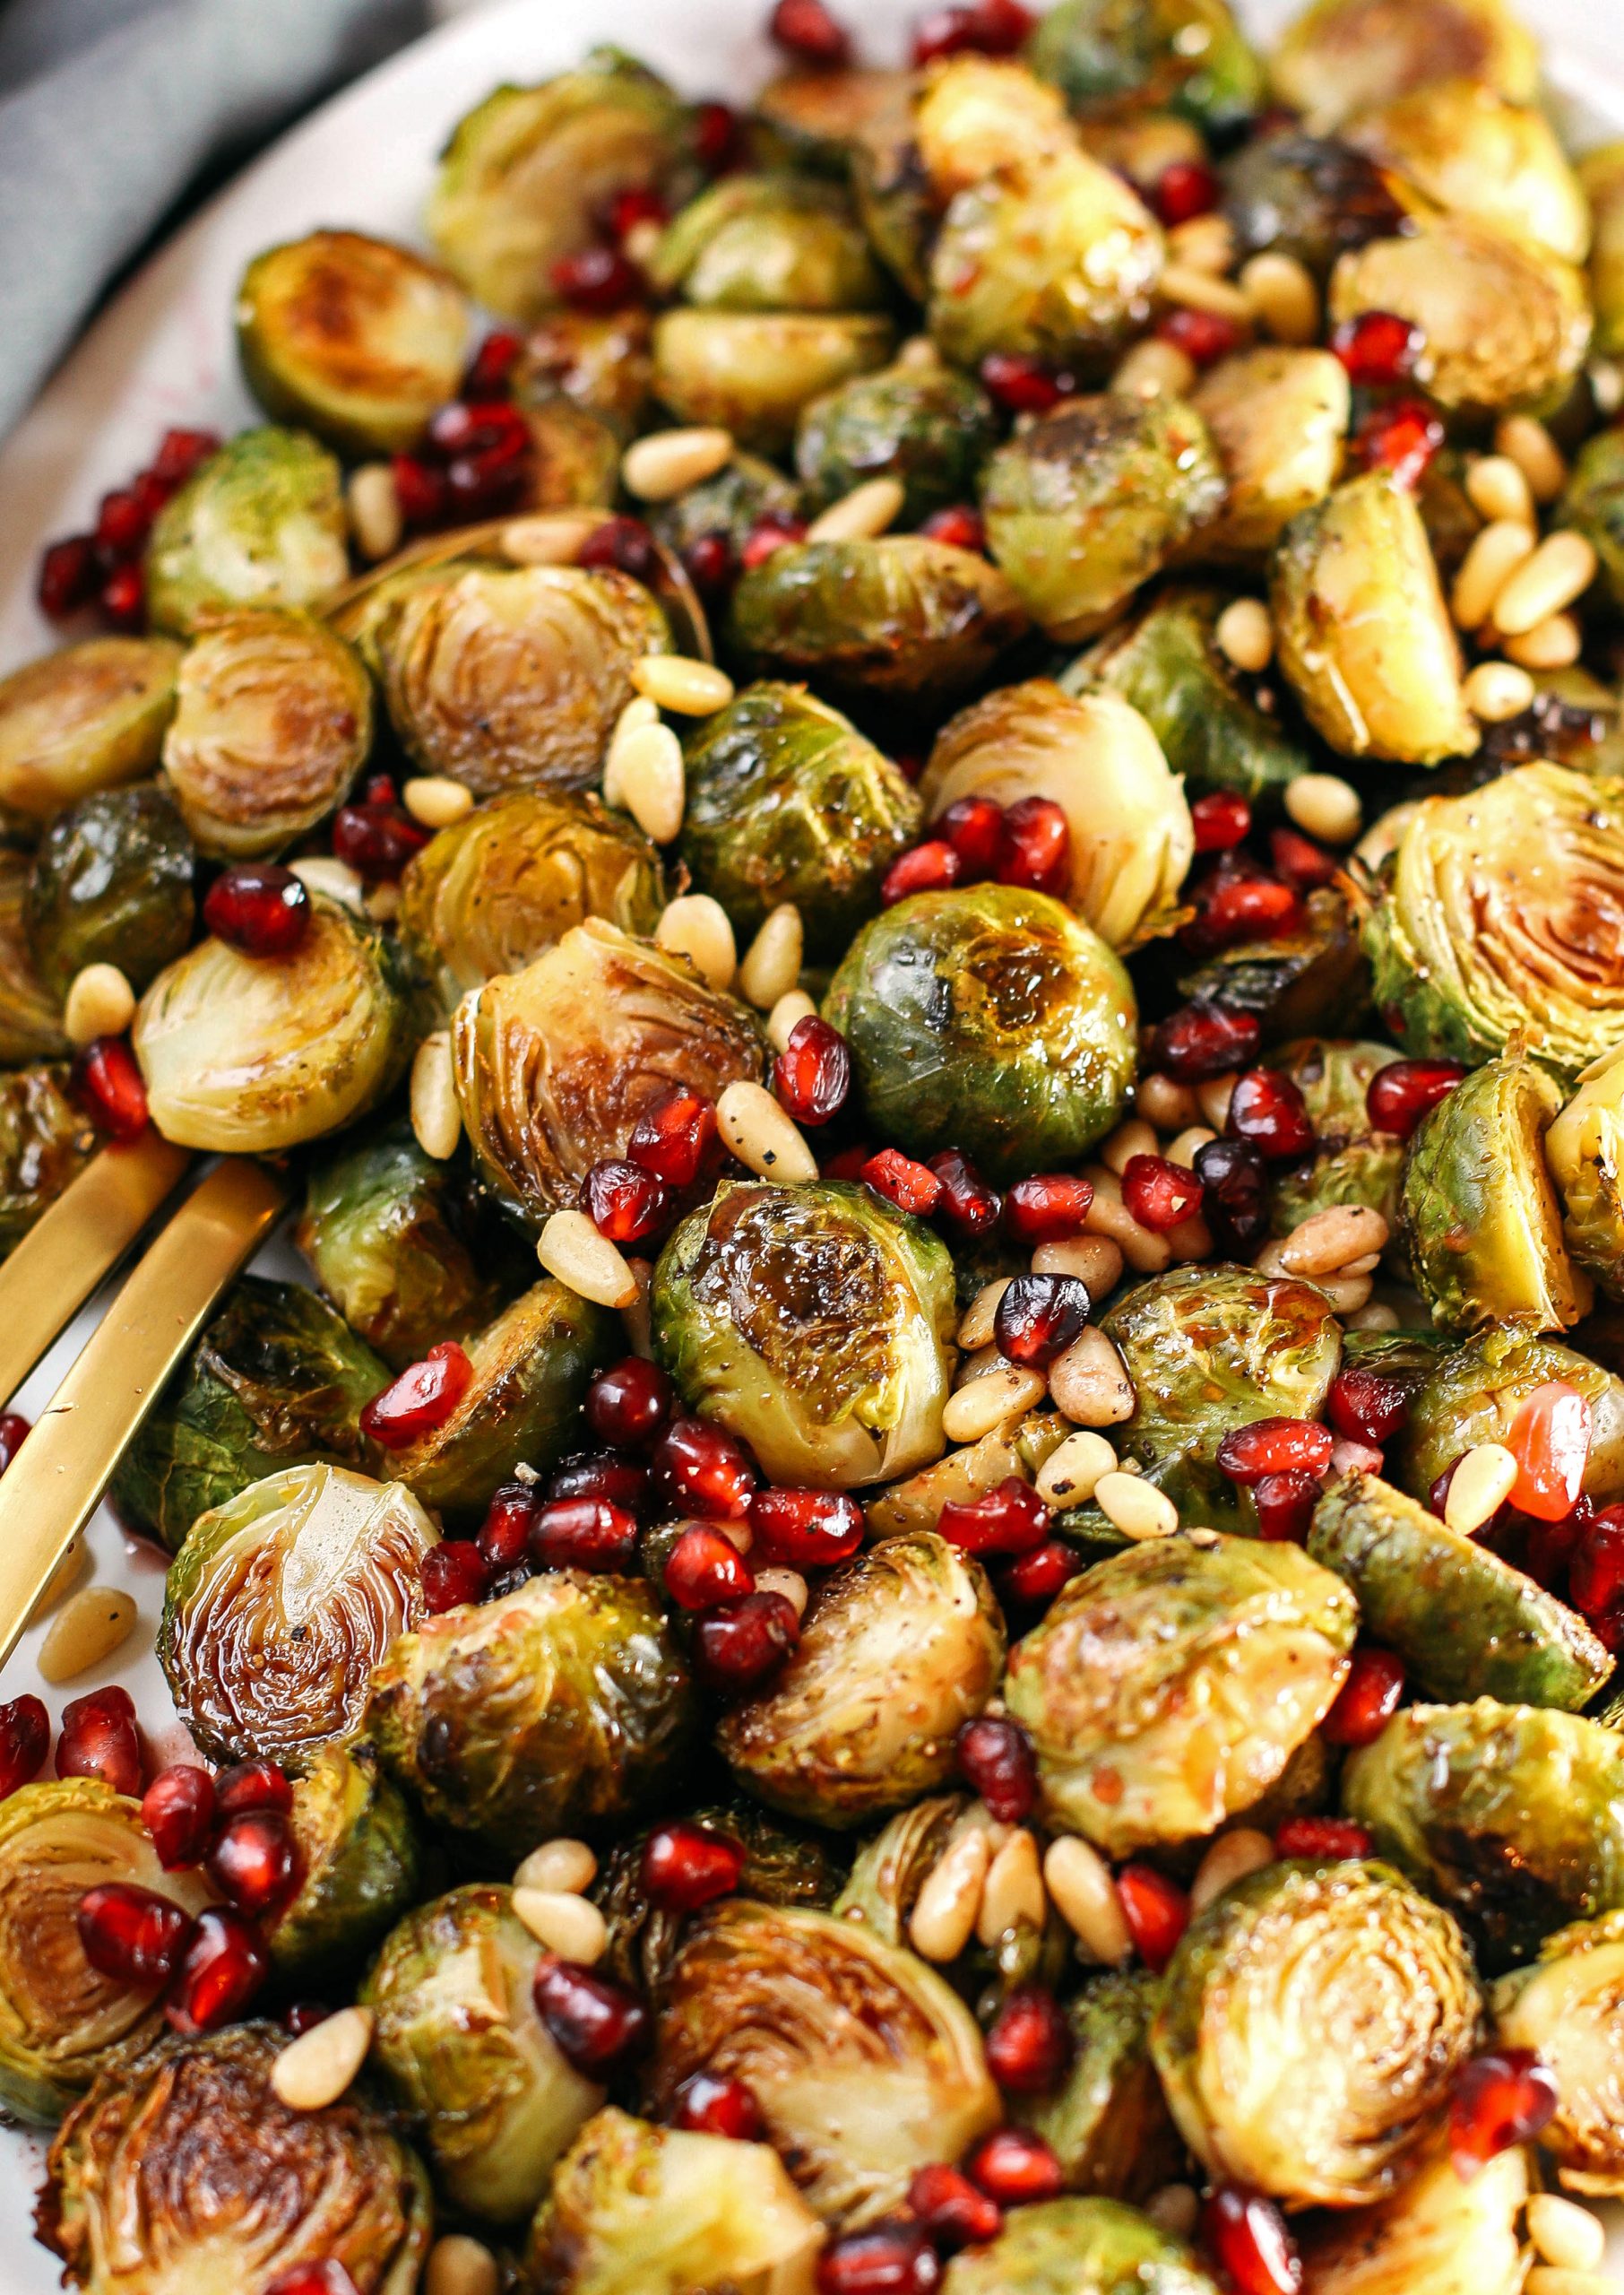 These Pomegranate Glazed Brussels Sprouts are savory, sweet and roasted to perfection making them the perfect holiday side dish for your table this season!